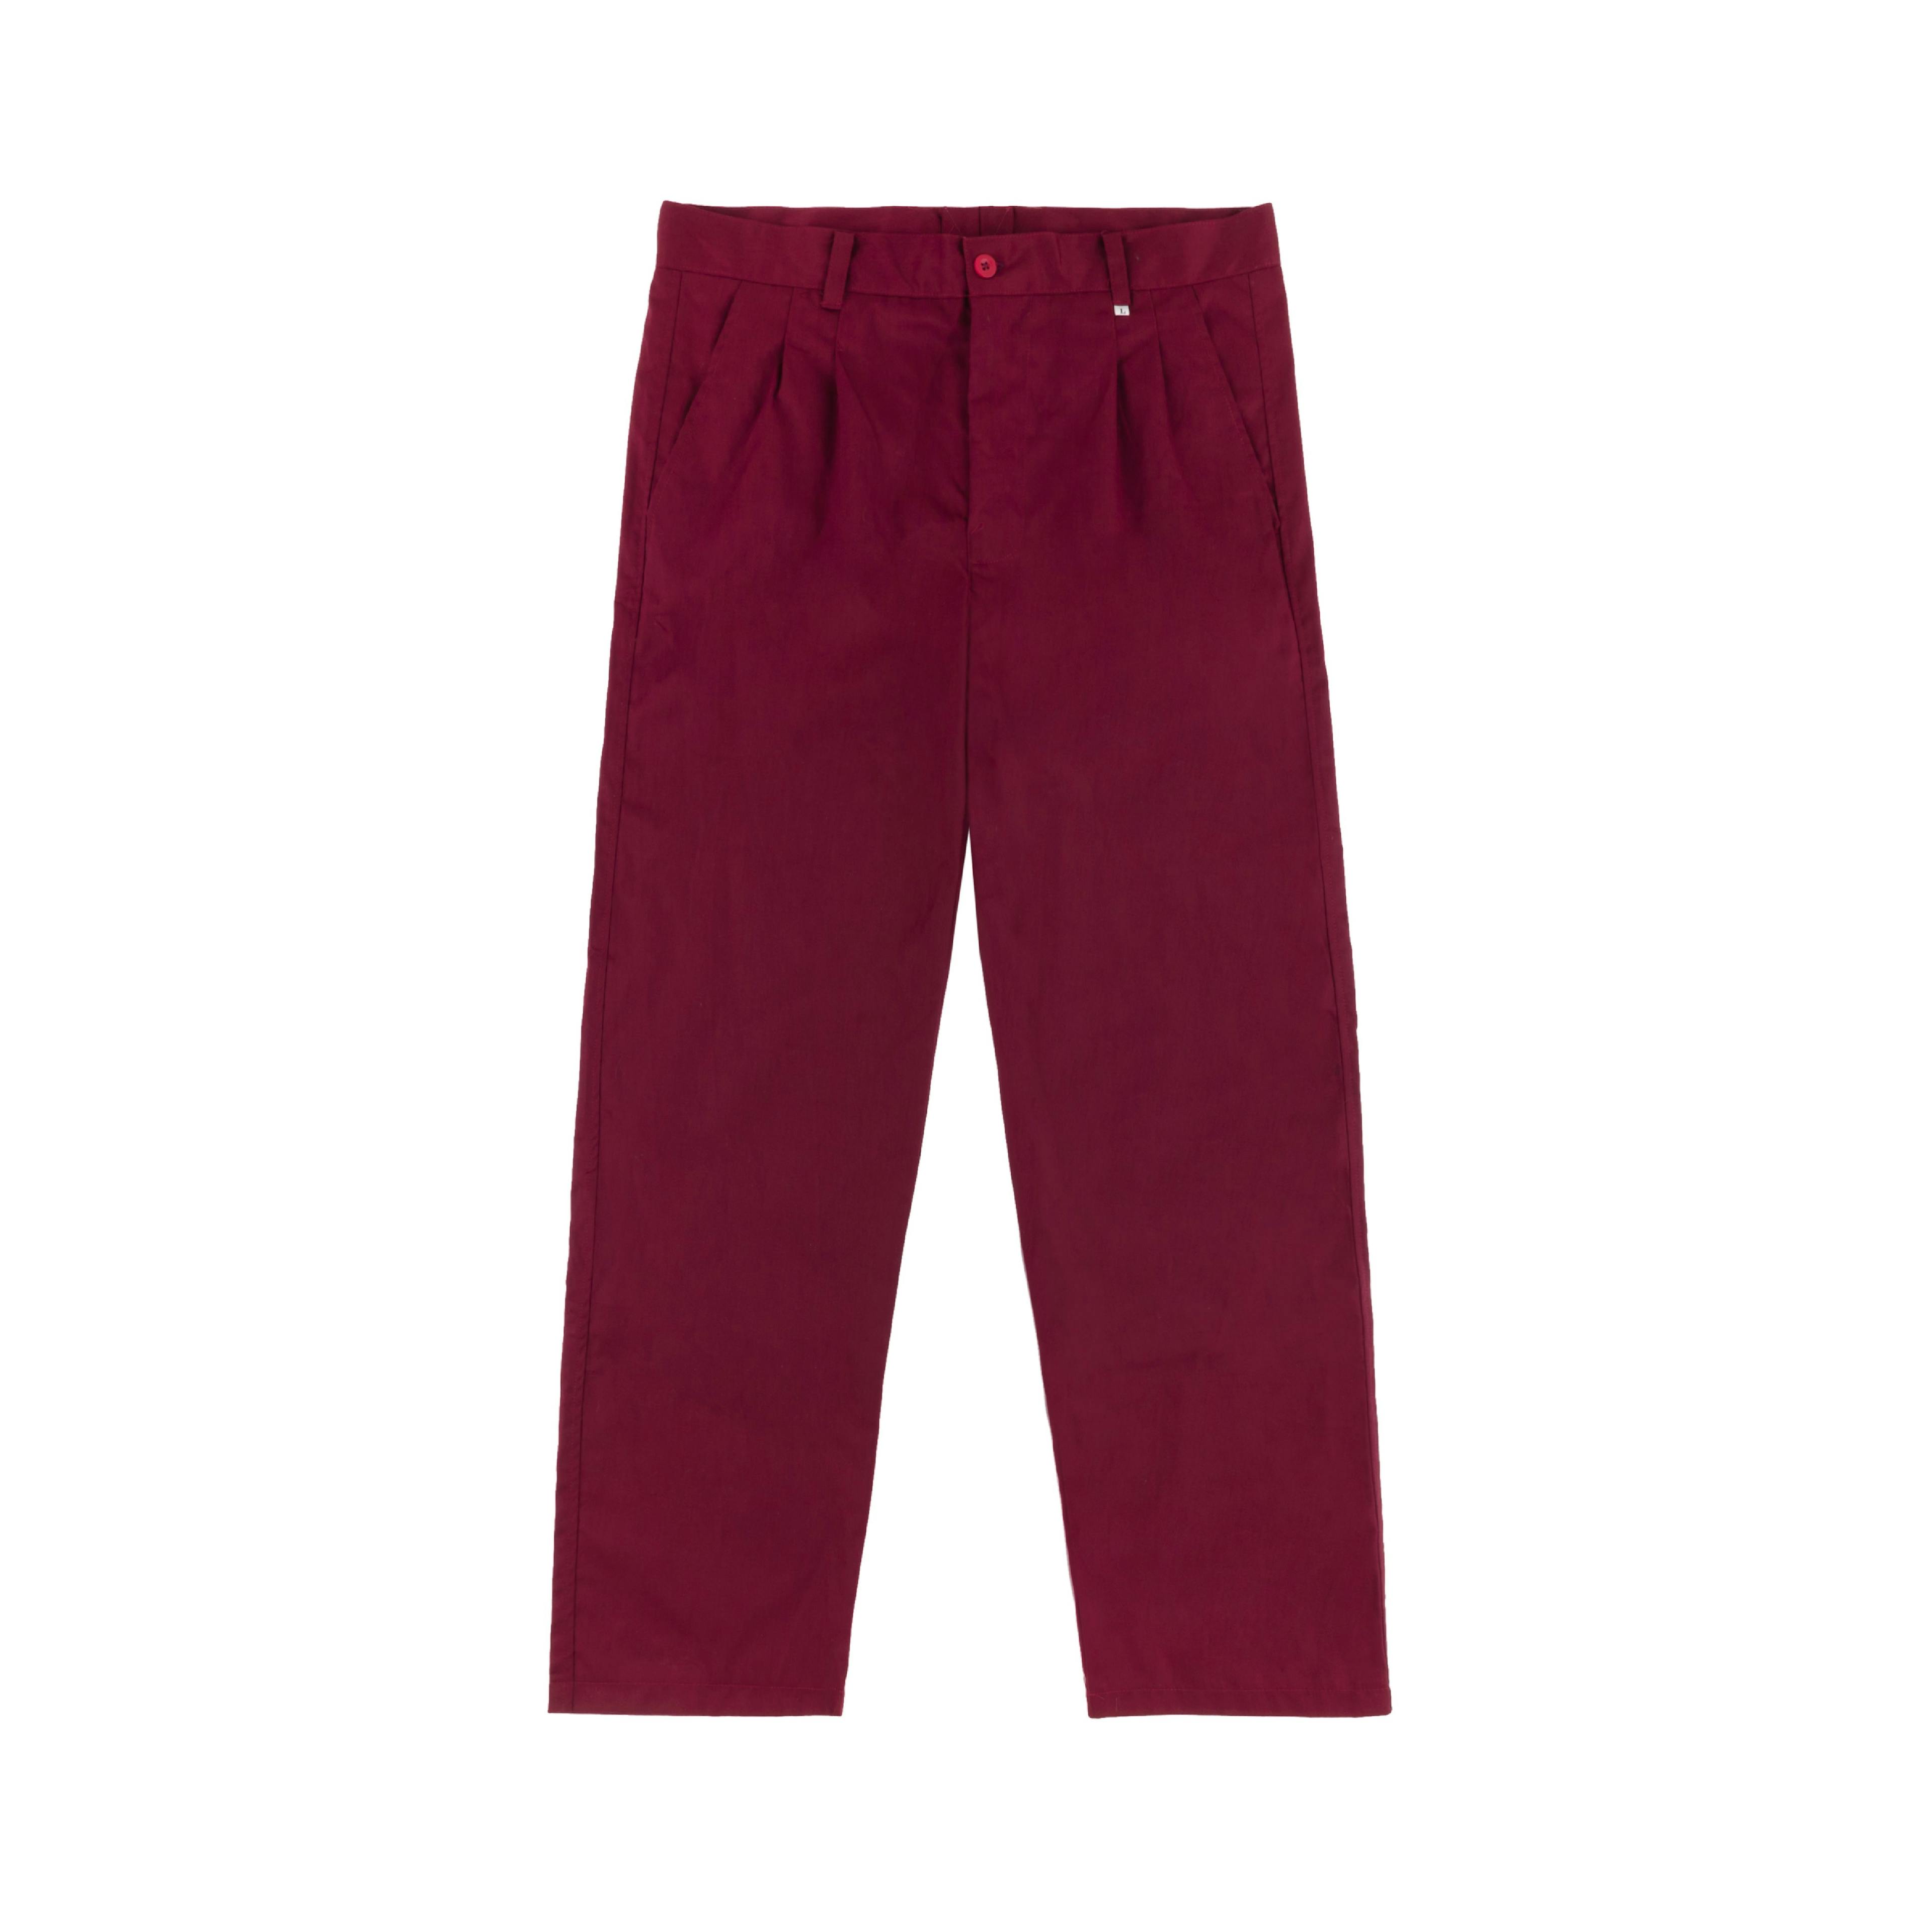 a maroon work pant = 1 of 4